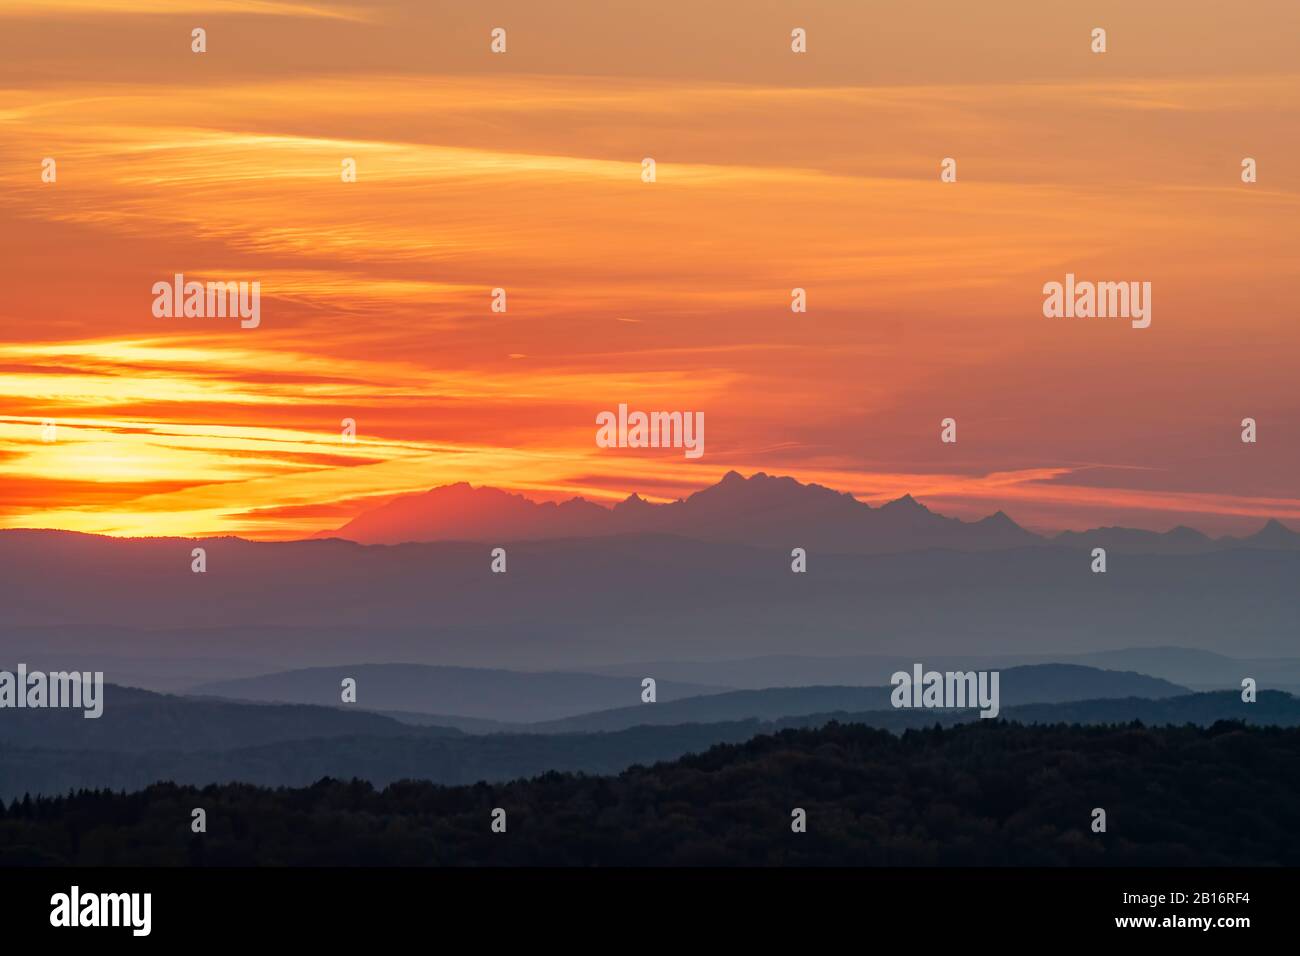 View of the sunset over the Tatra Mountains from the Beskid Pass over Radoszyce in the Bieszczady Mountains. Poland, Europe Stock Photo